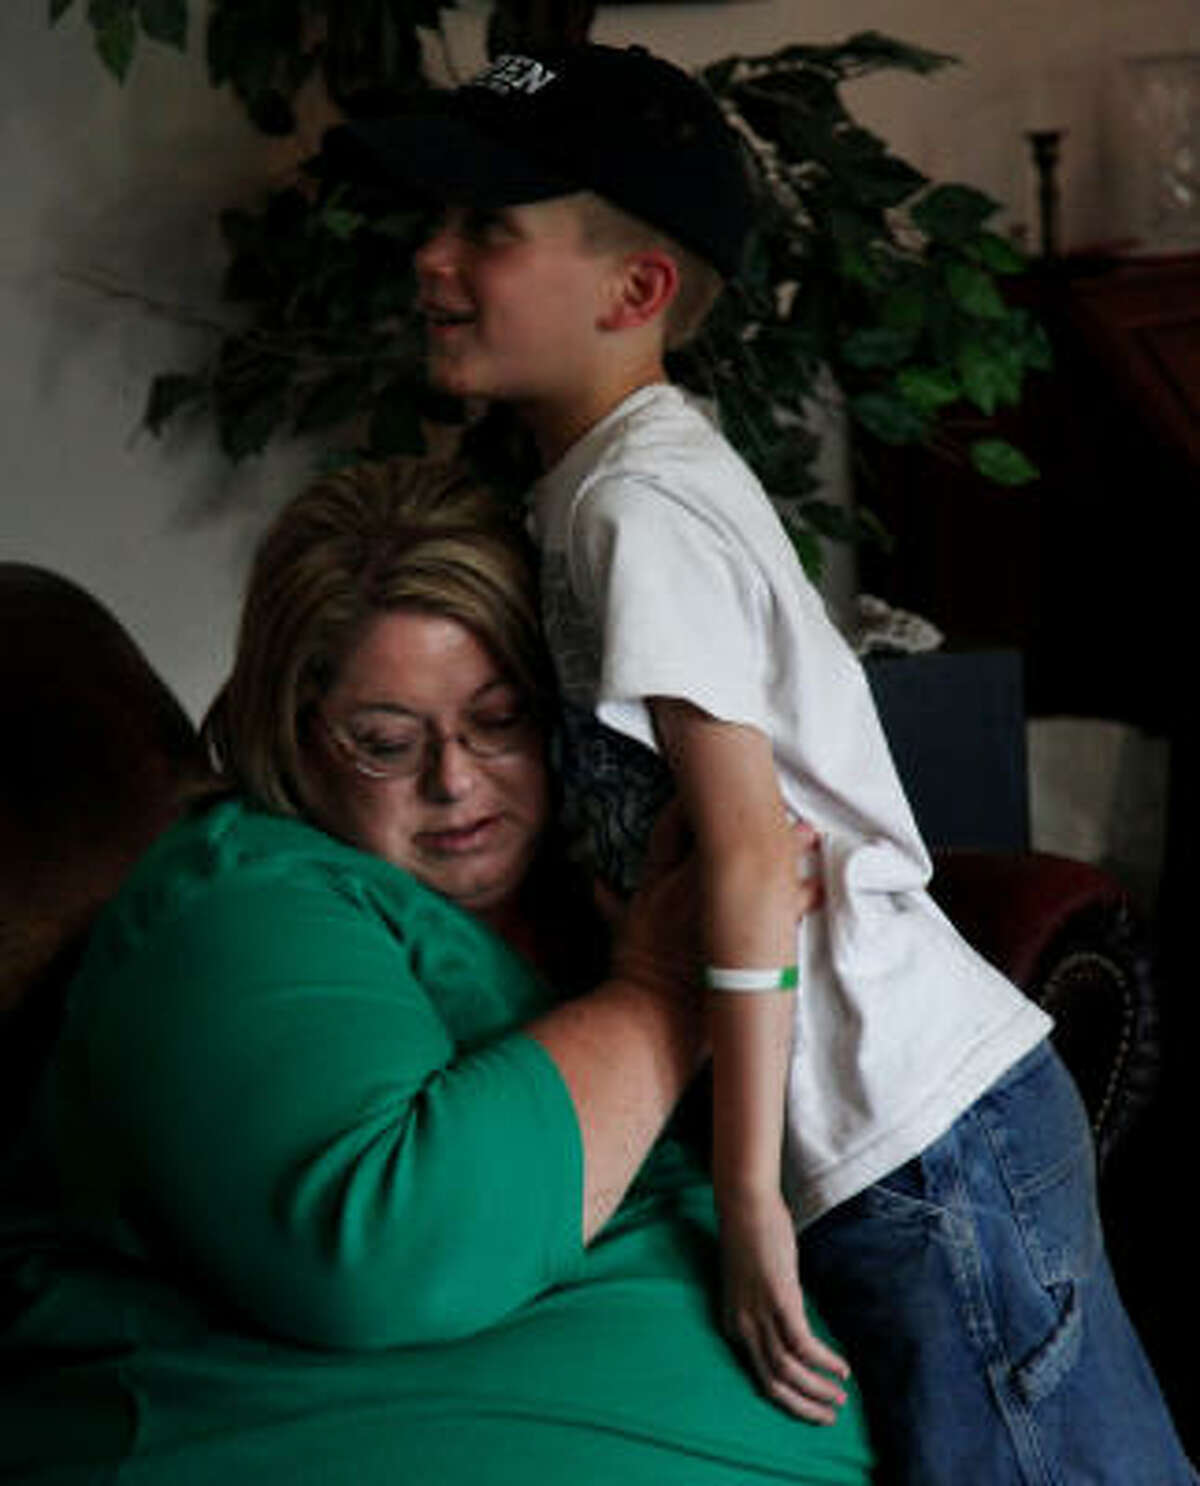 Dana Janczak listens to her 10-year-old son Nathanael's chest after his pulmicort treatment in their rural Cleveland home. Janczak said she and her children suffer from asthma and find access to a doctor difficult.